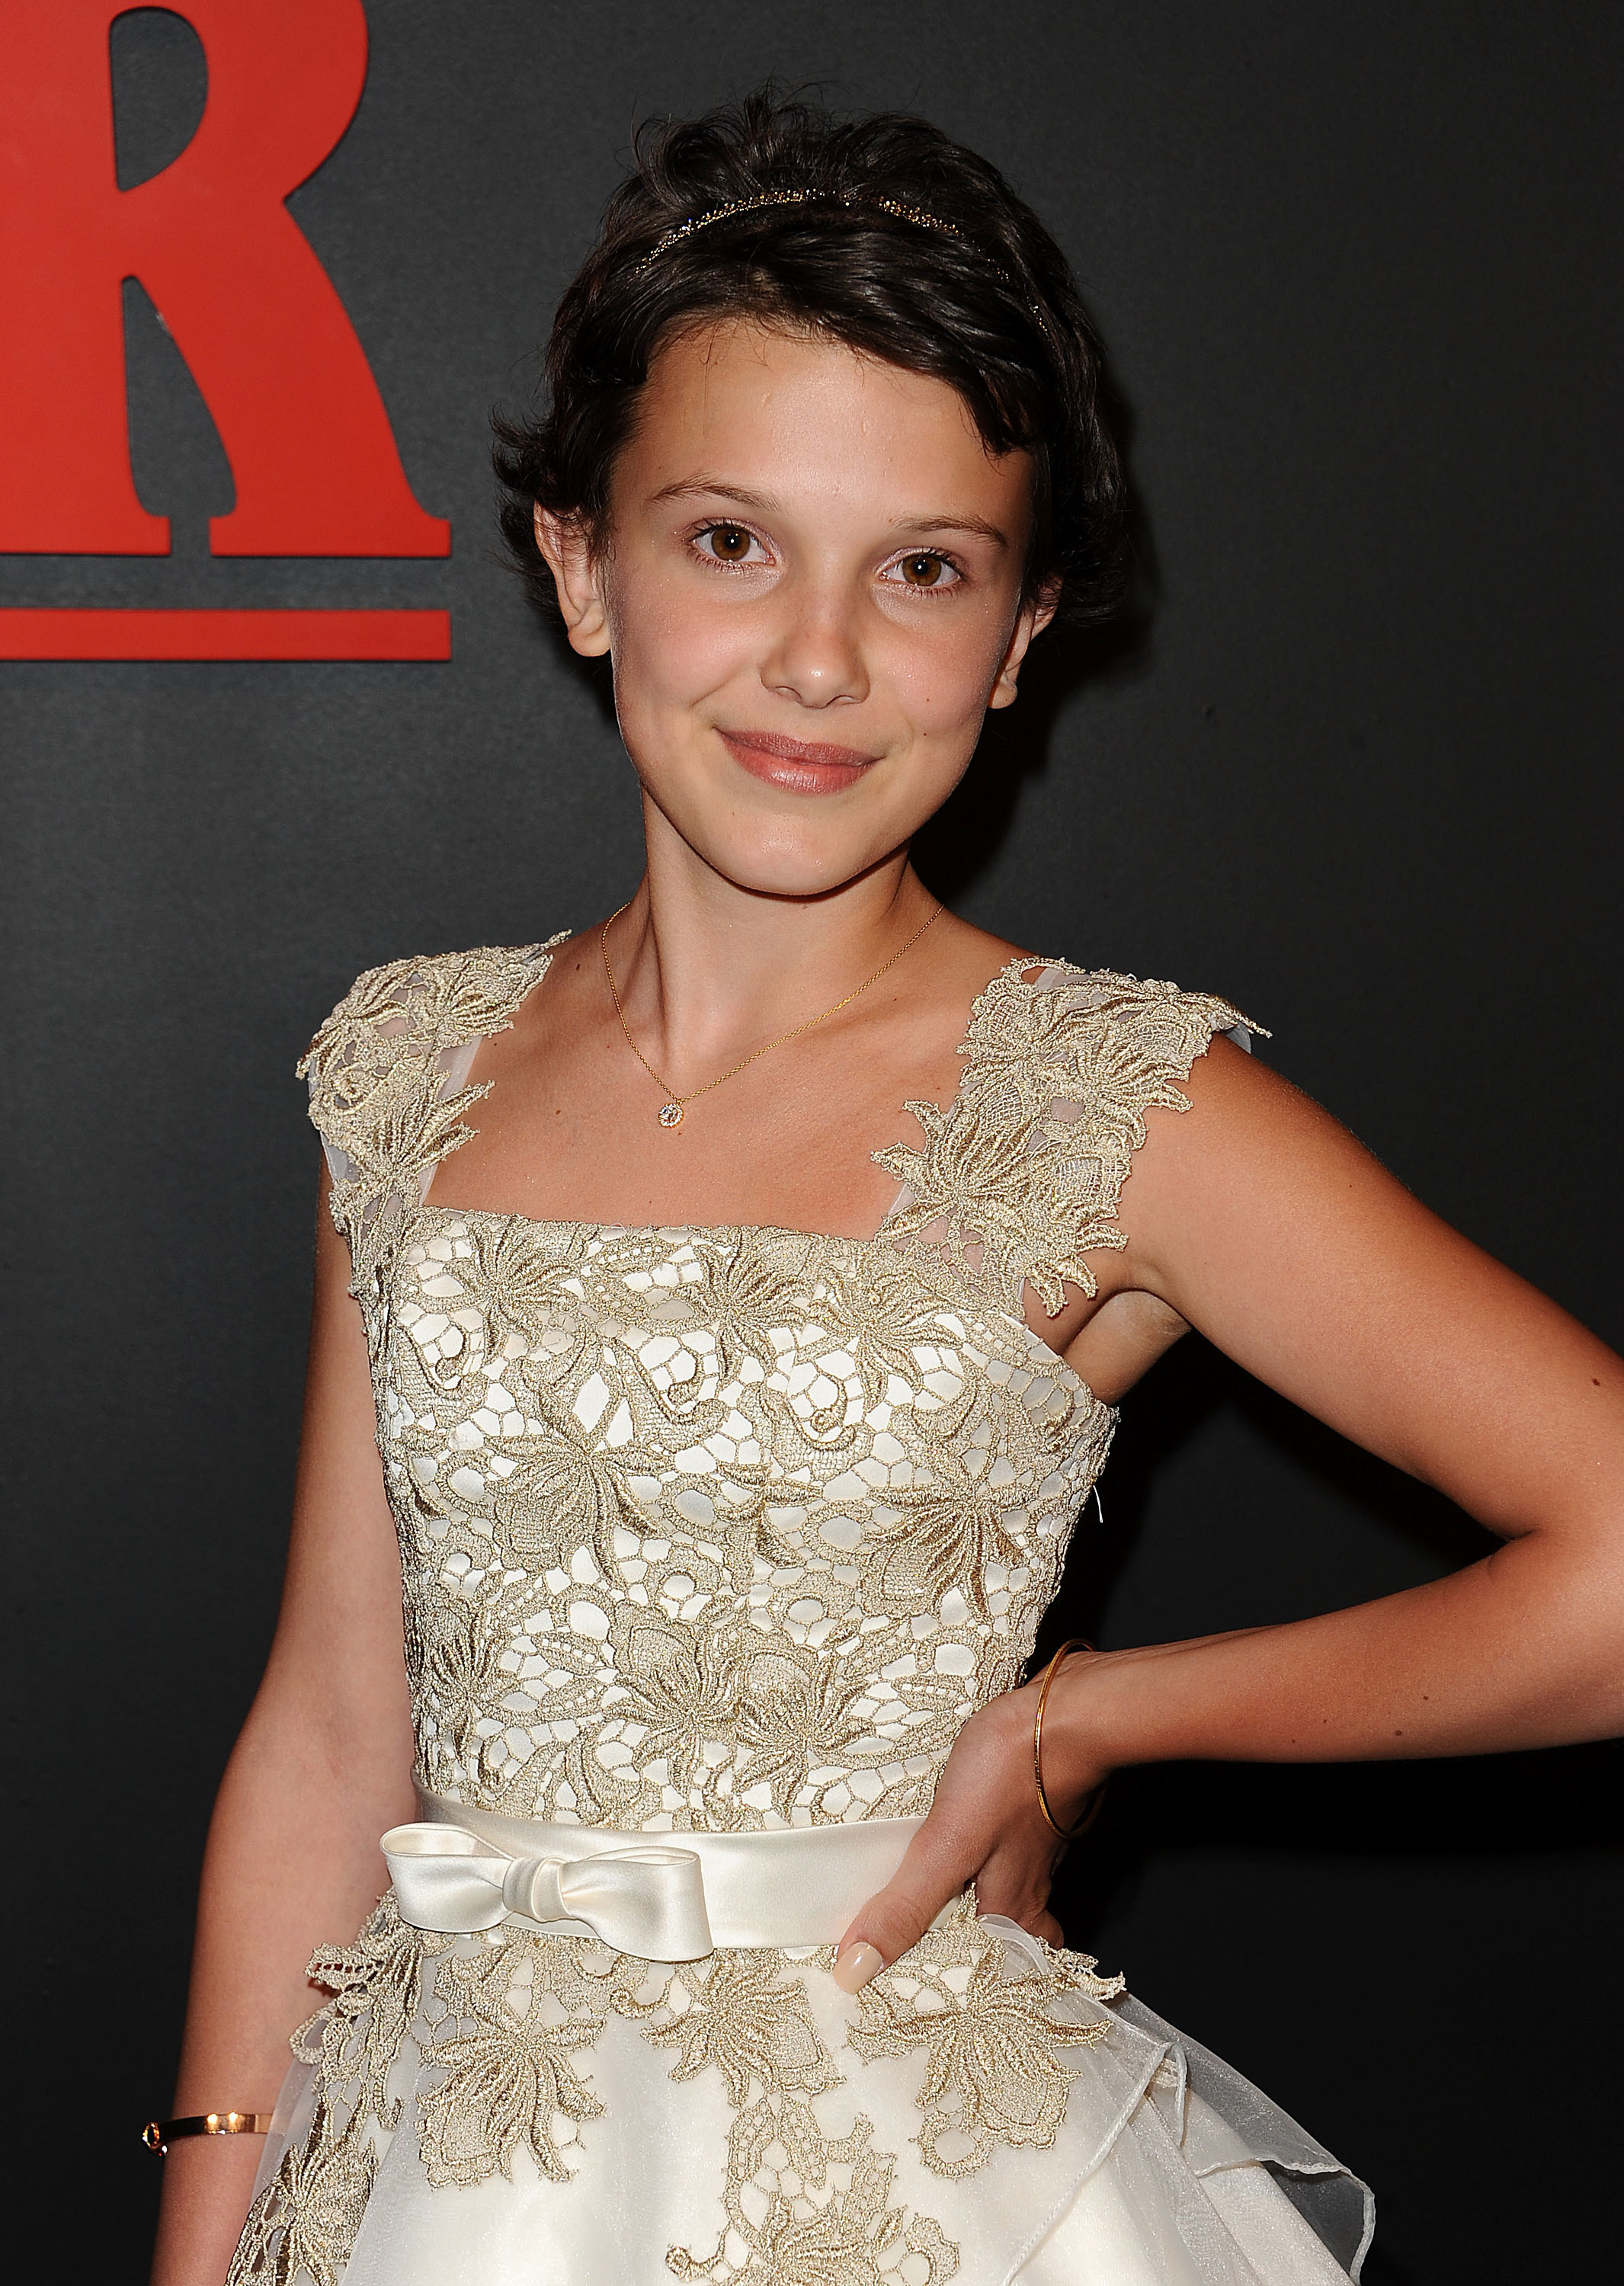 Millie Bobby Brown on the red carpet